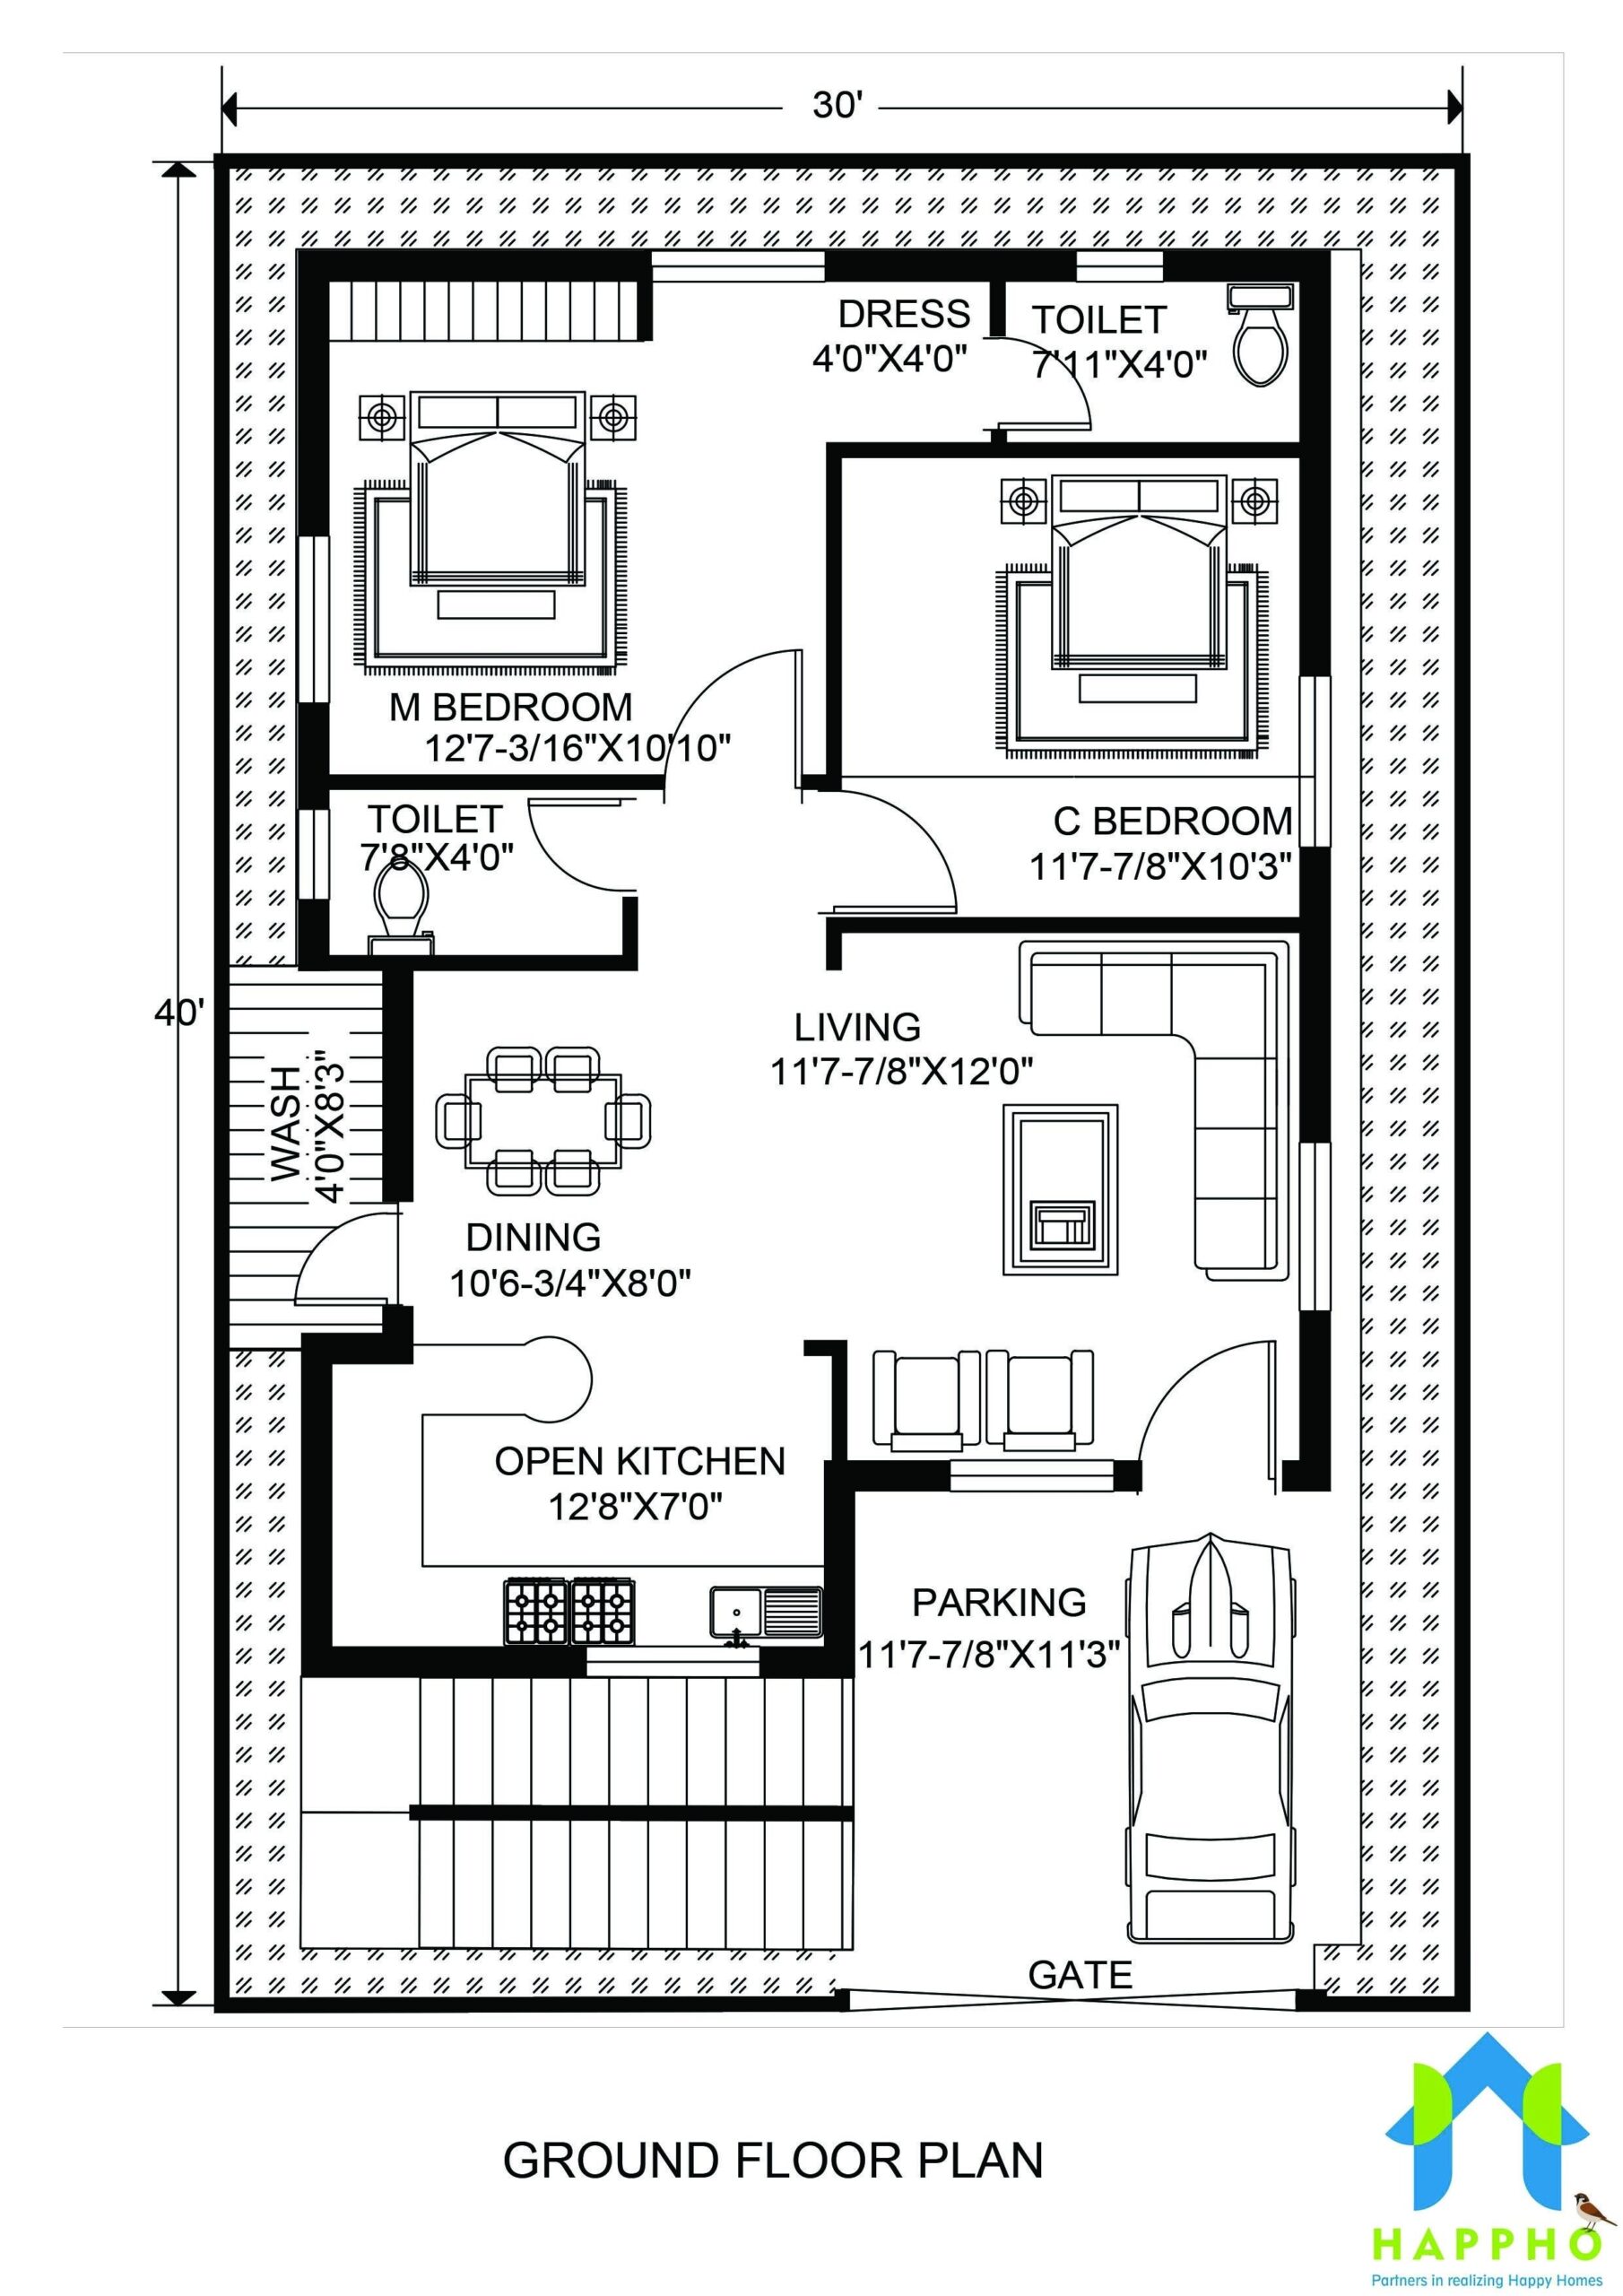 Top 1200 sq ft 2 bhk 031 happho | 30x40 house plans, 2bhk house plan in house plan for 15 feet by 60 feet plot plot size 100 square yards